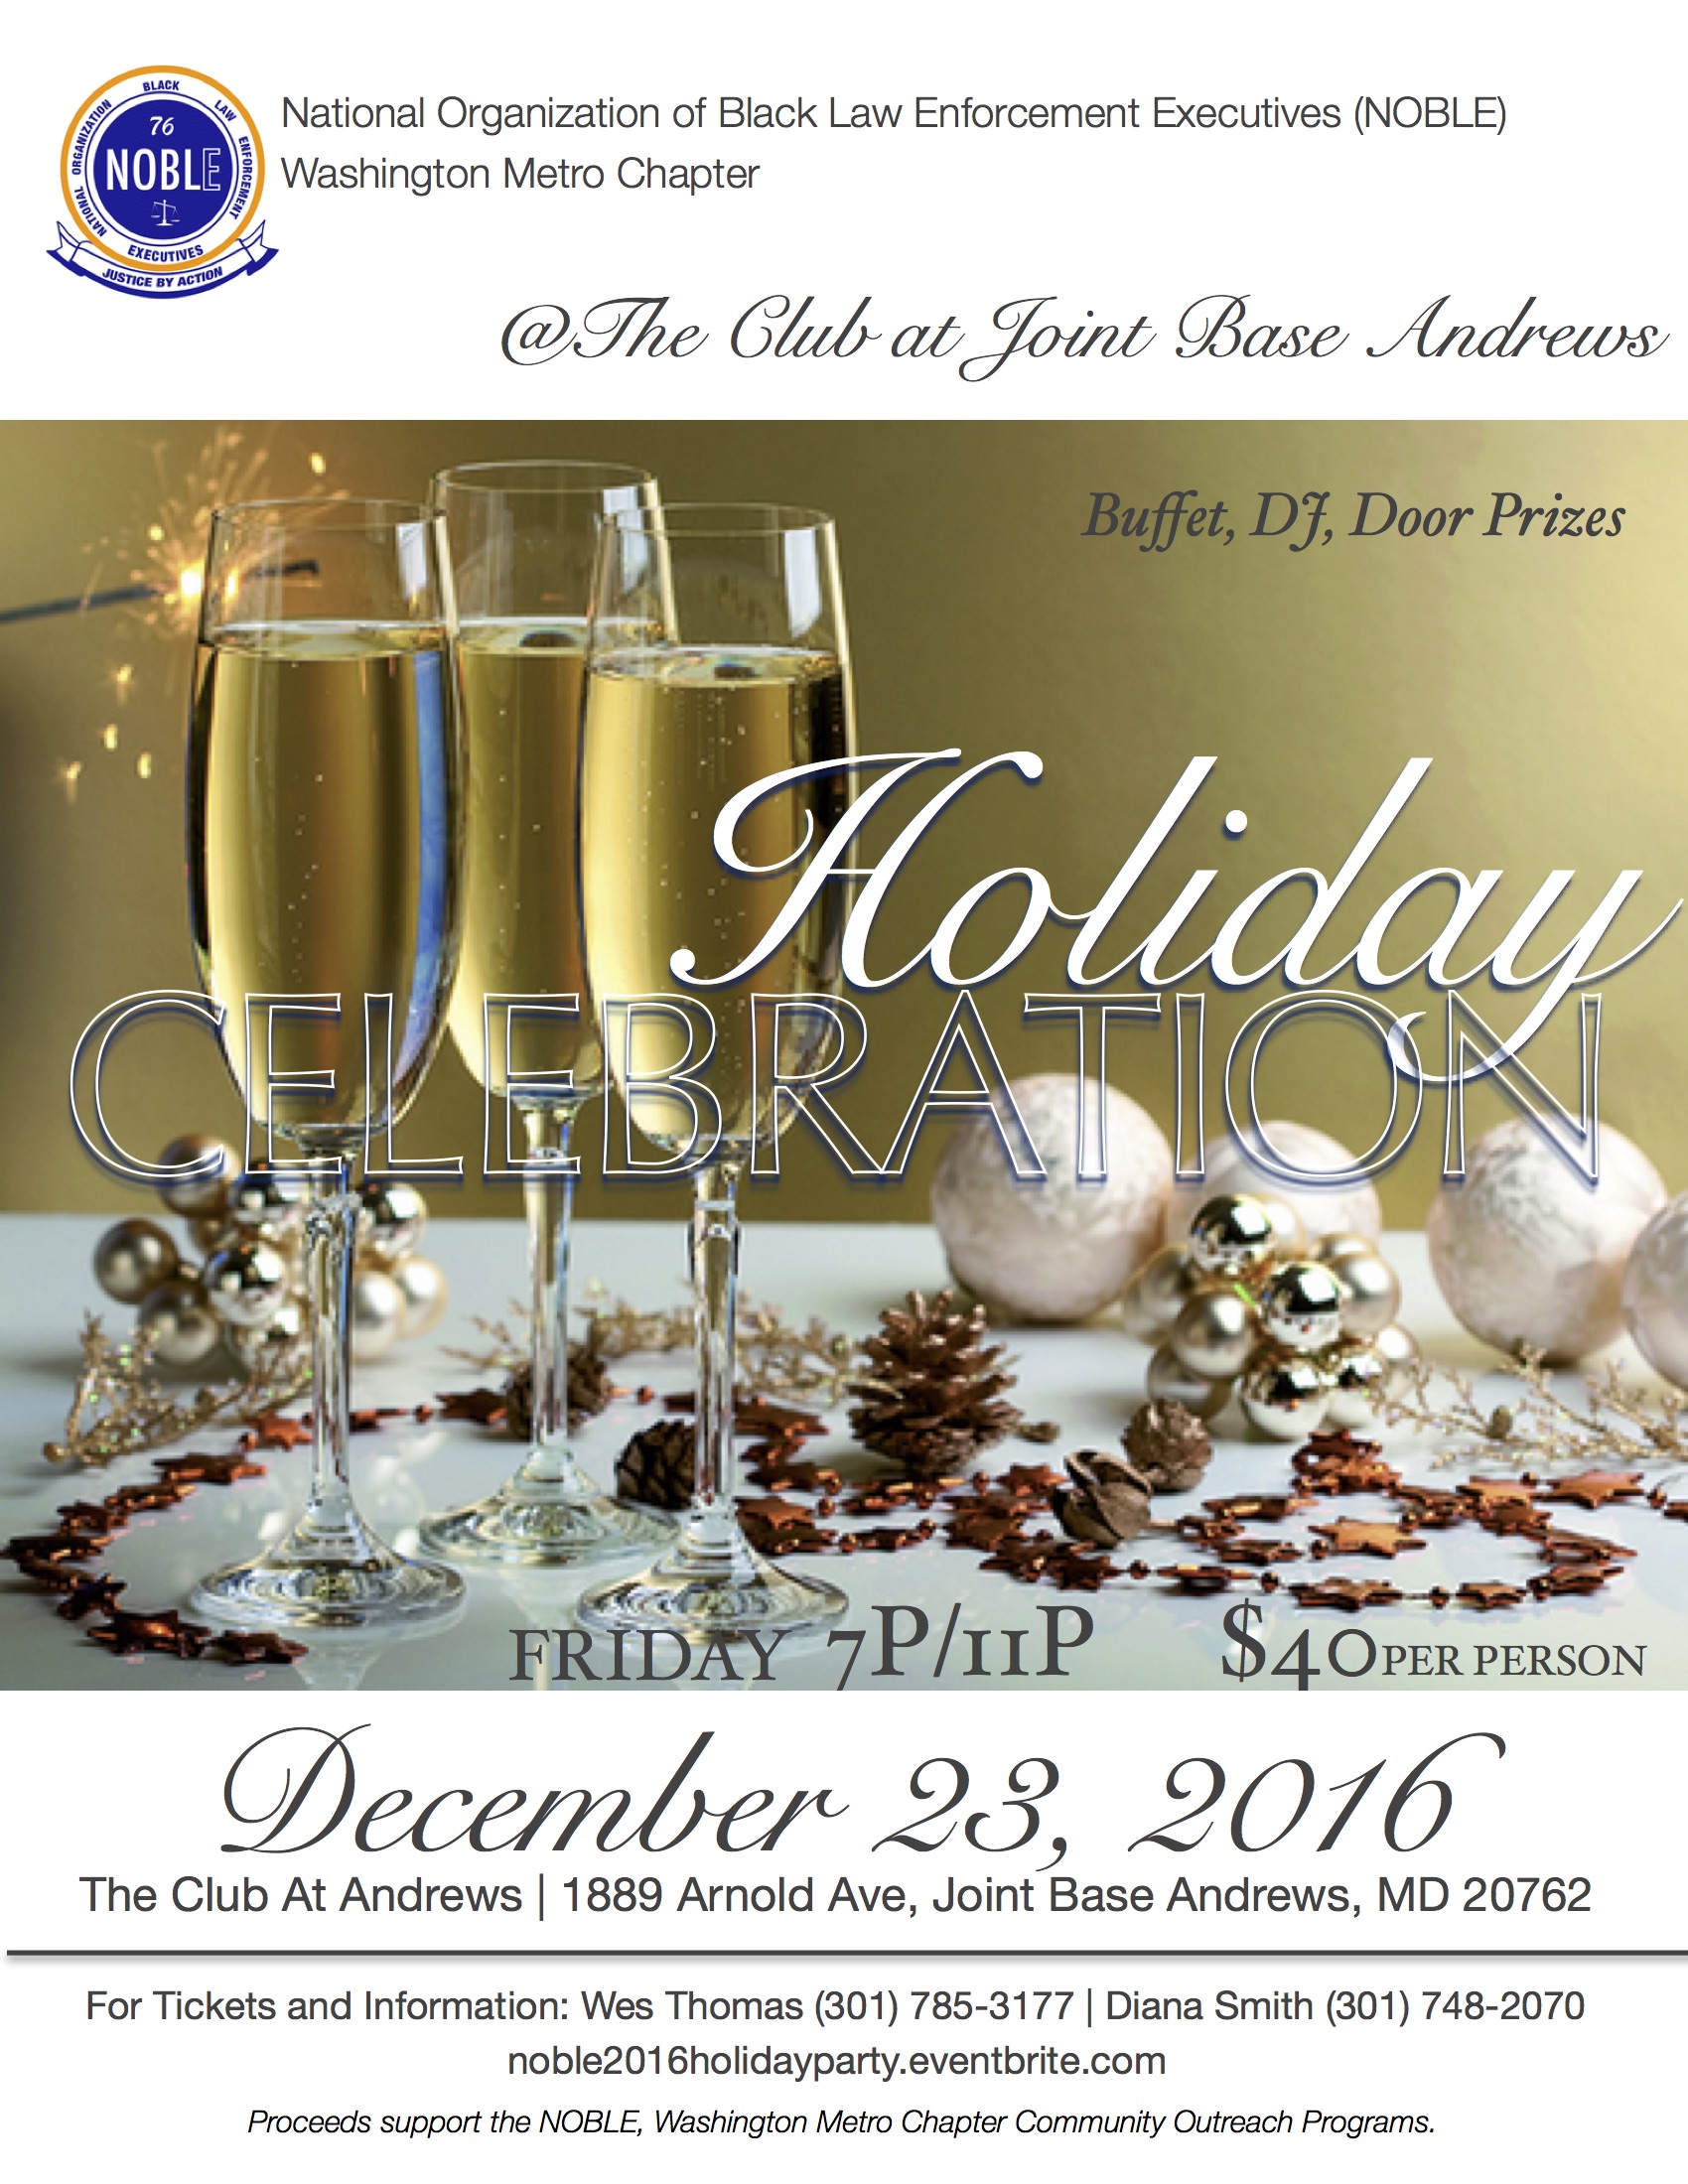 2016 holiday party flyer image